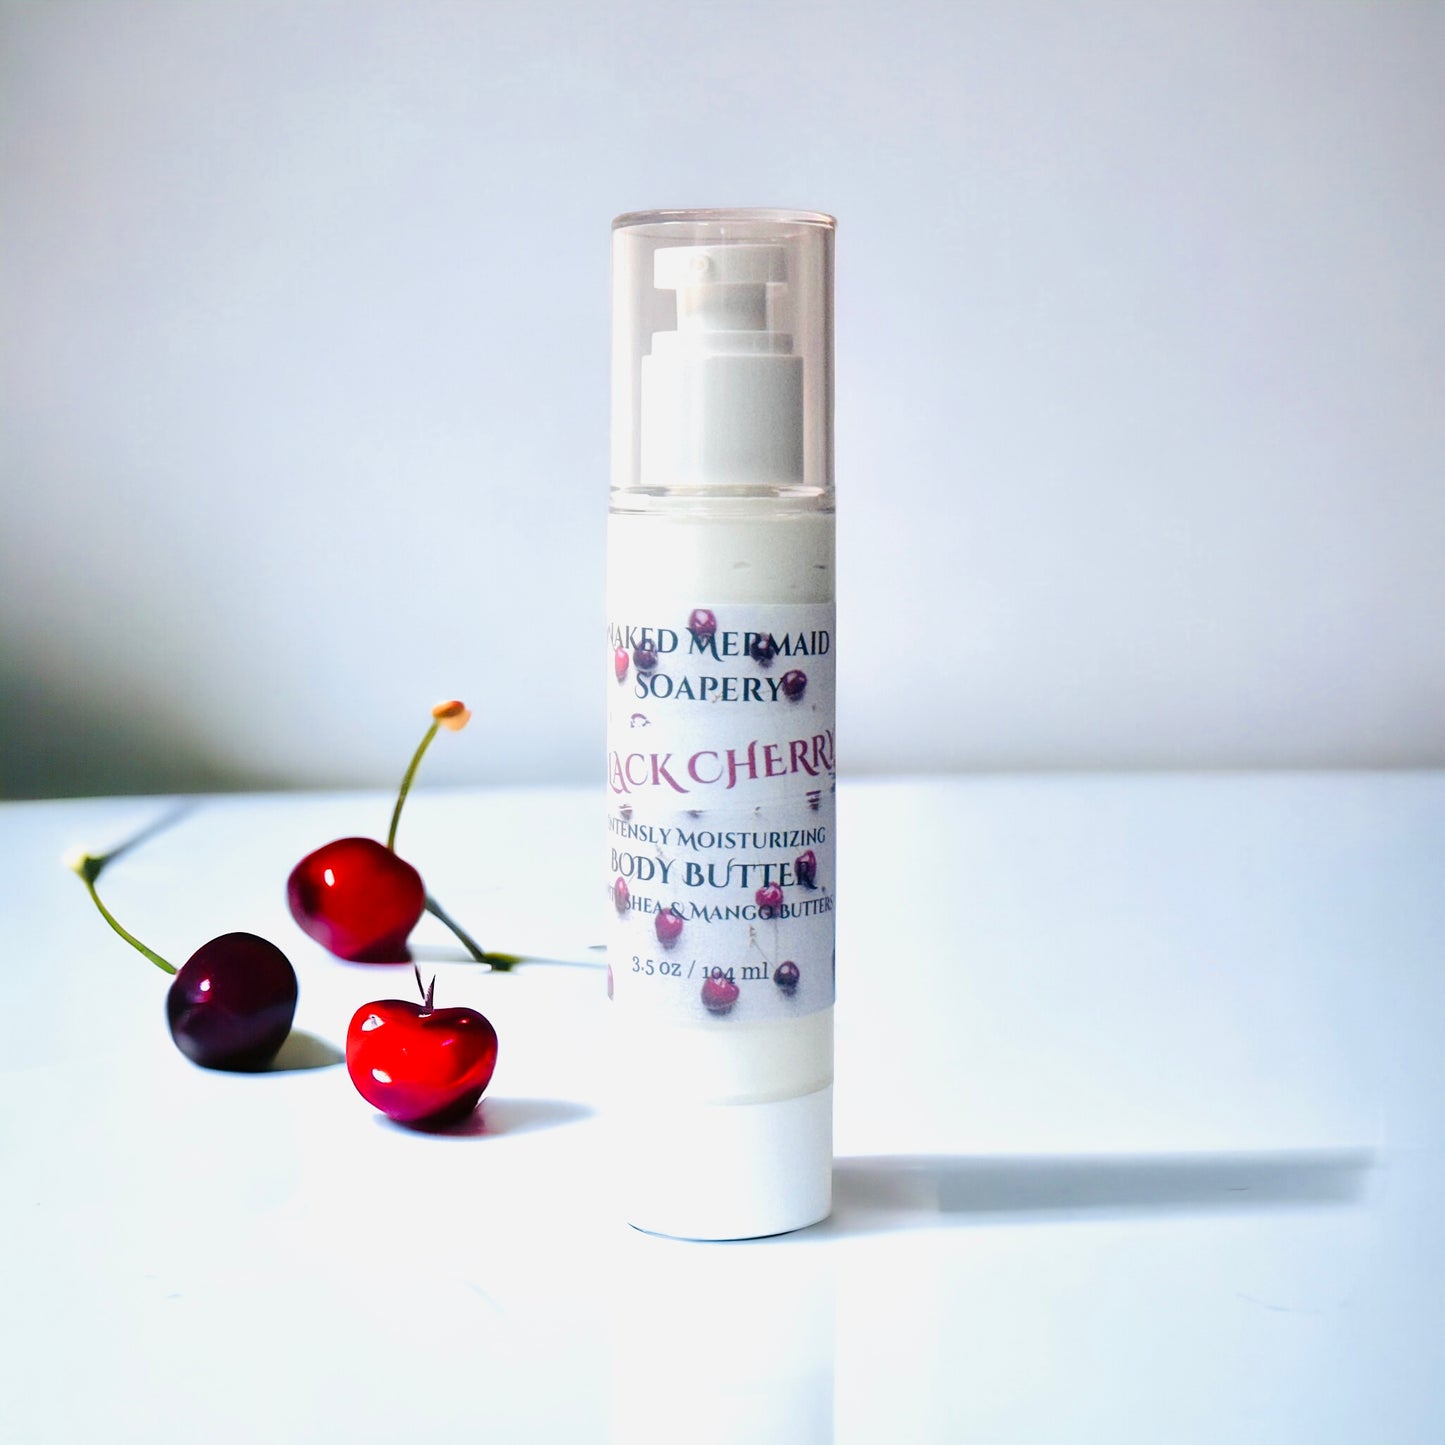 a tube of body butter next to two cherries